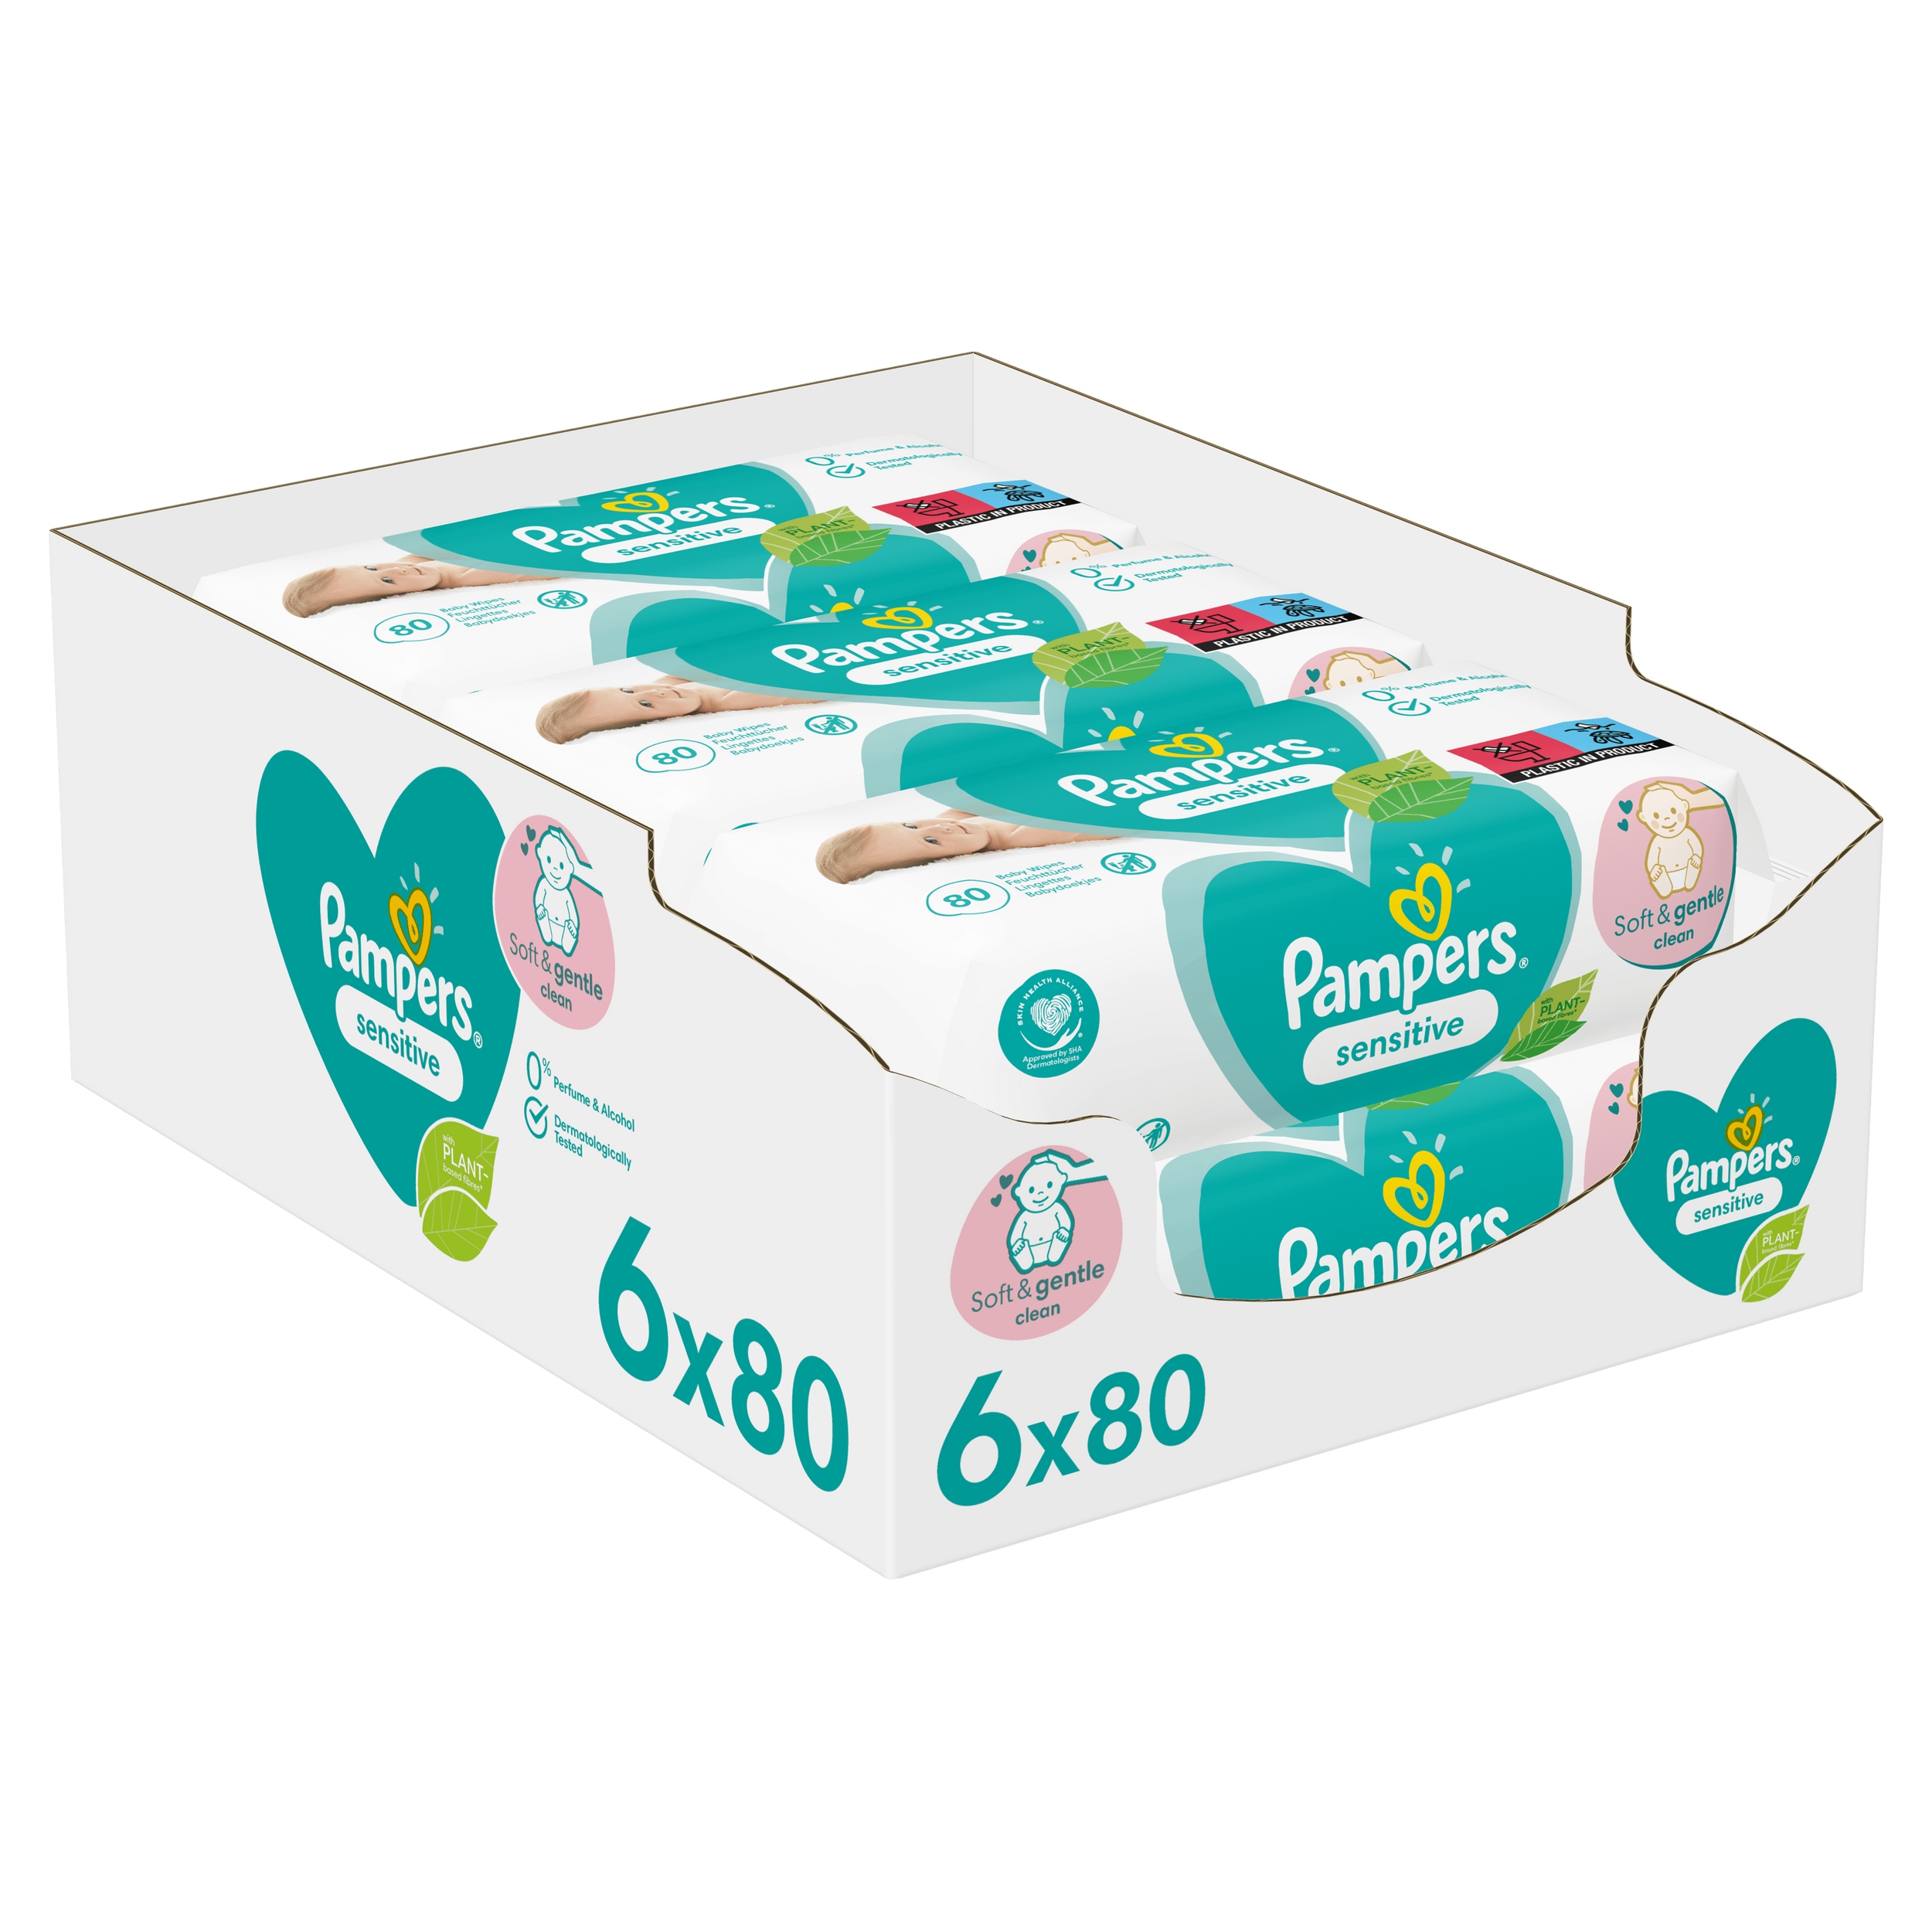 pampers active baby 4maxi 147szt